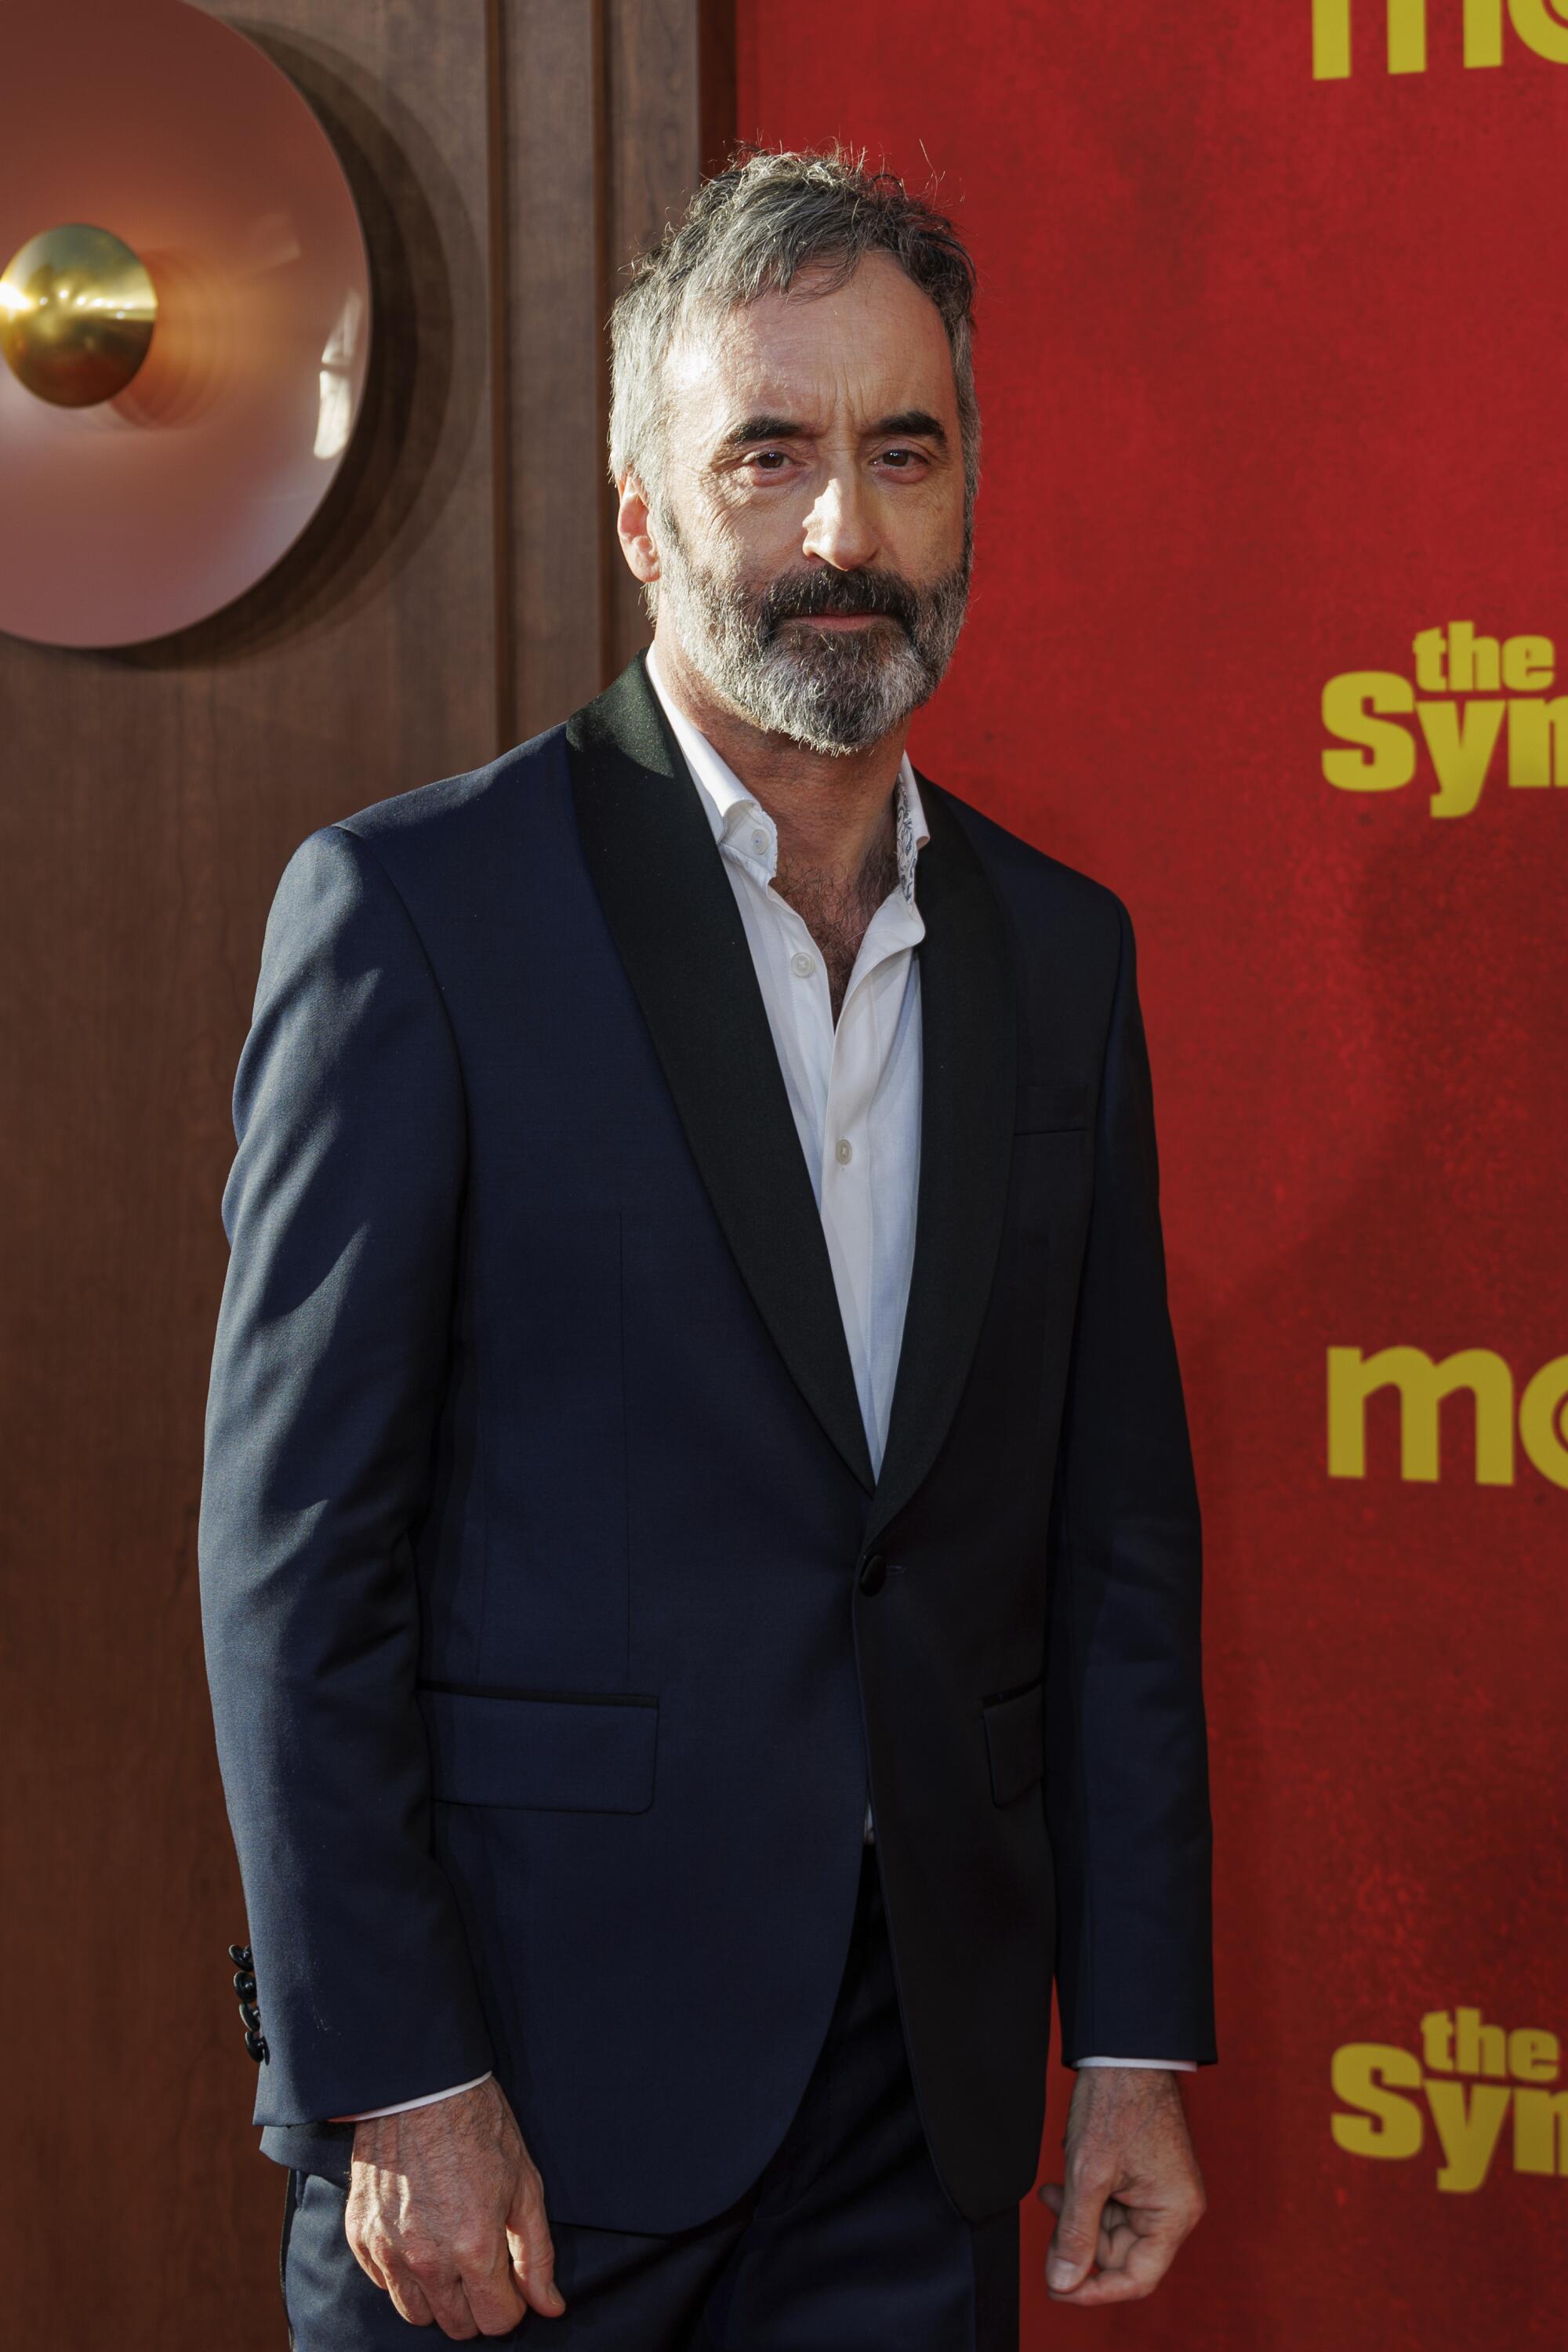 A man in a suit stands in front of "The Sympathizer" red backdrop.